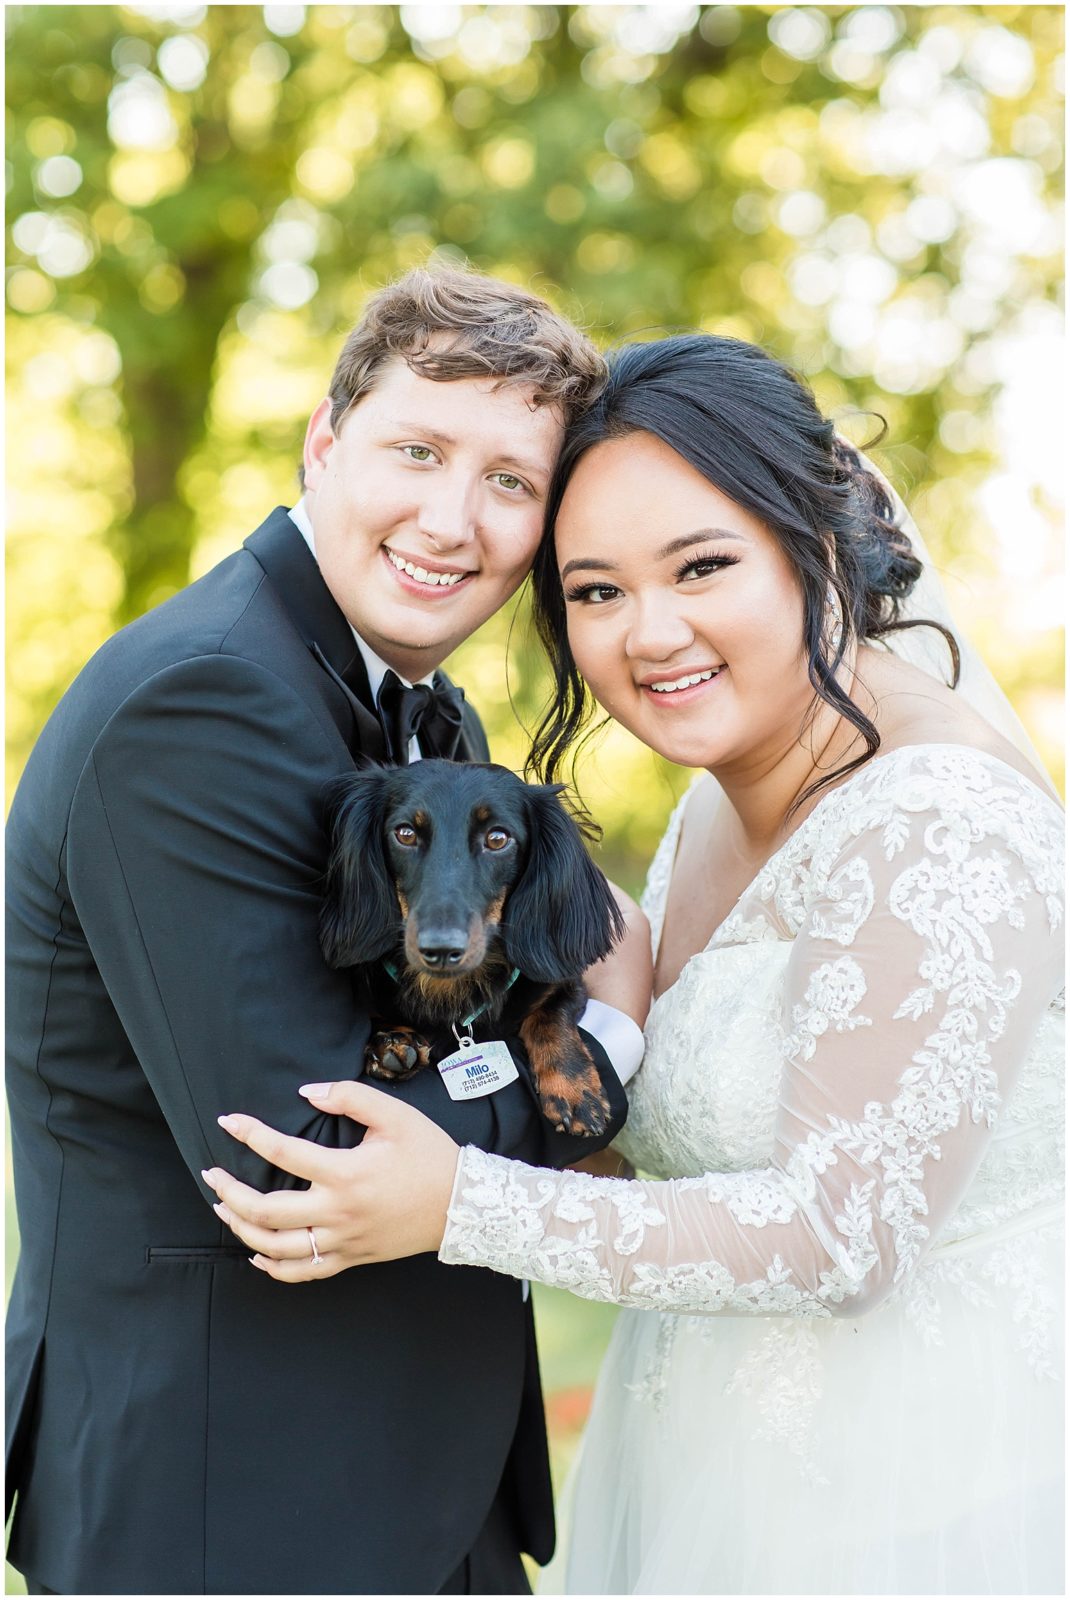 Bride and Groom Portraits | Koffie Knechtion Wedding in South Sioux City, Nebraska shot by Jessica Brees Photo & Video